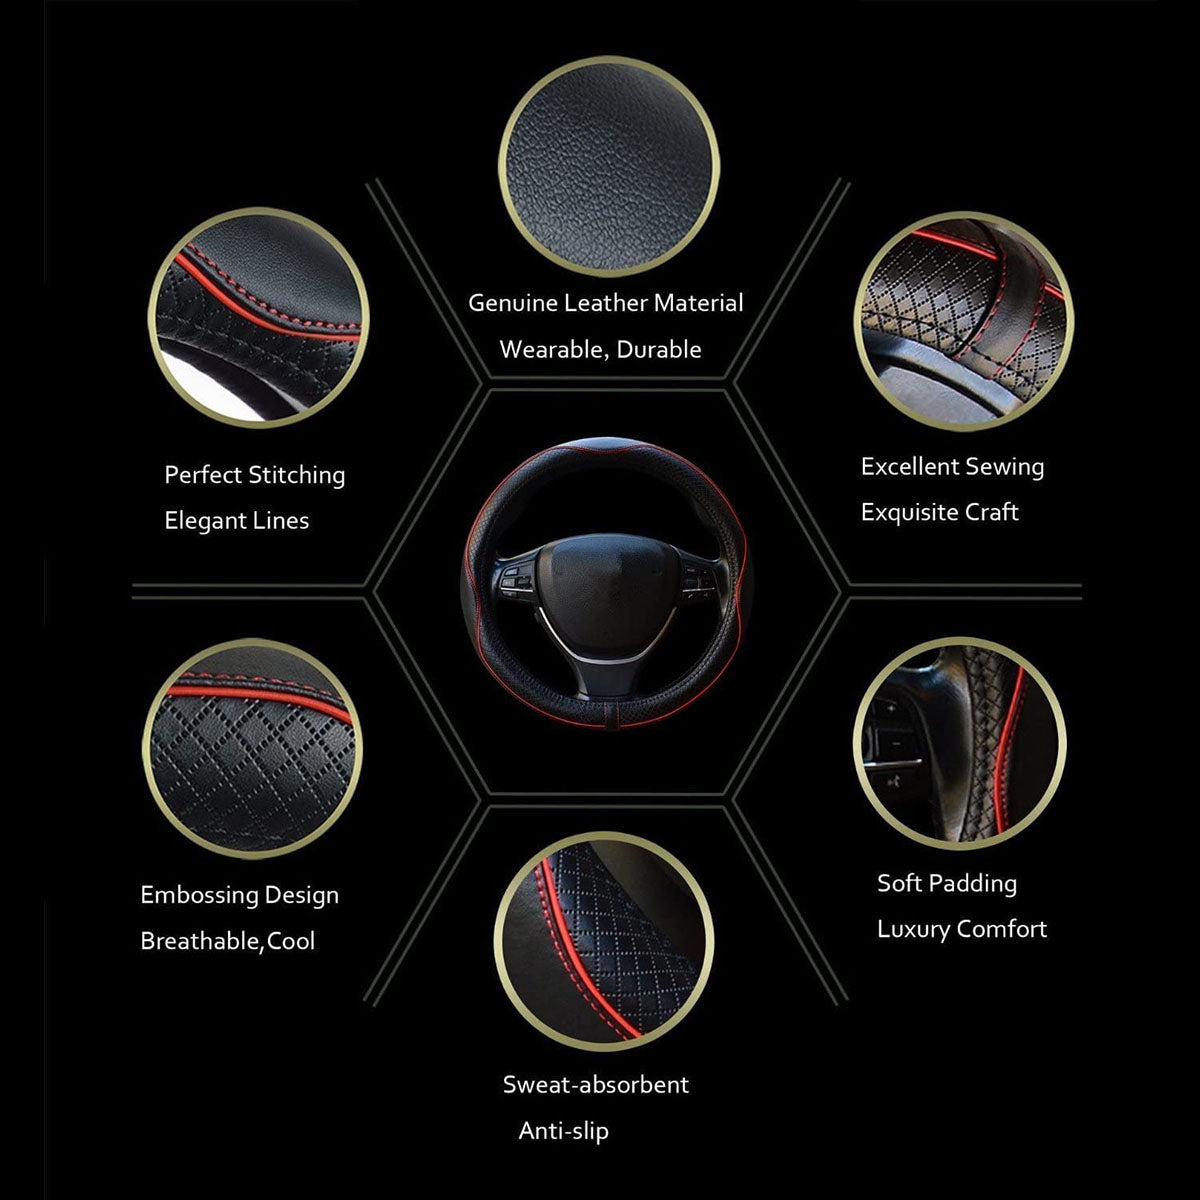 Car Steering Wheel Cover, Custom For Your Cars, Anti-Slip, Safety, Soft, Breathable, Heavy Duty, Thick, Full Surround, Sports Style, Car Accessories CA18990